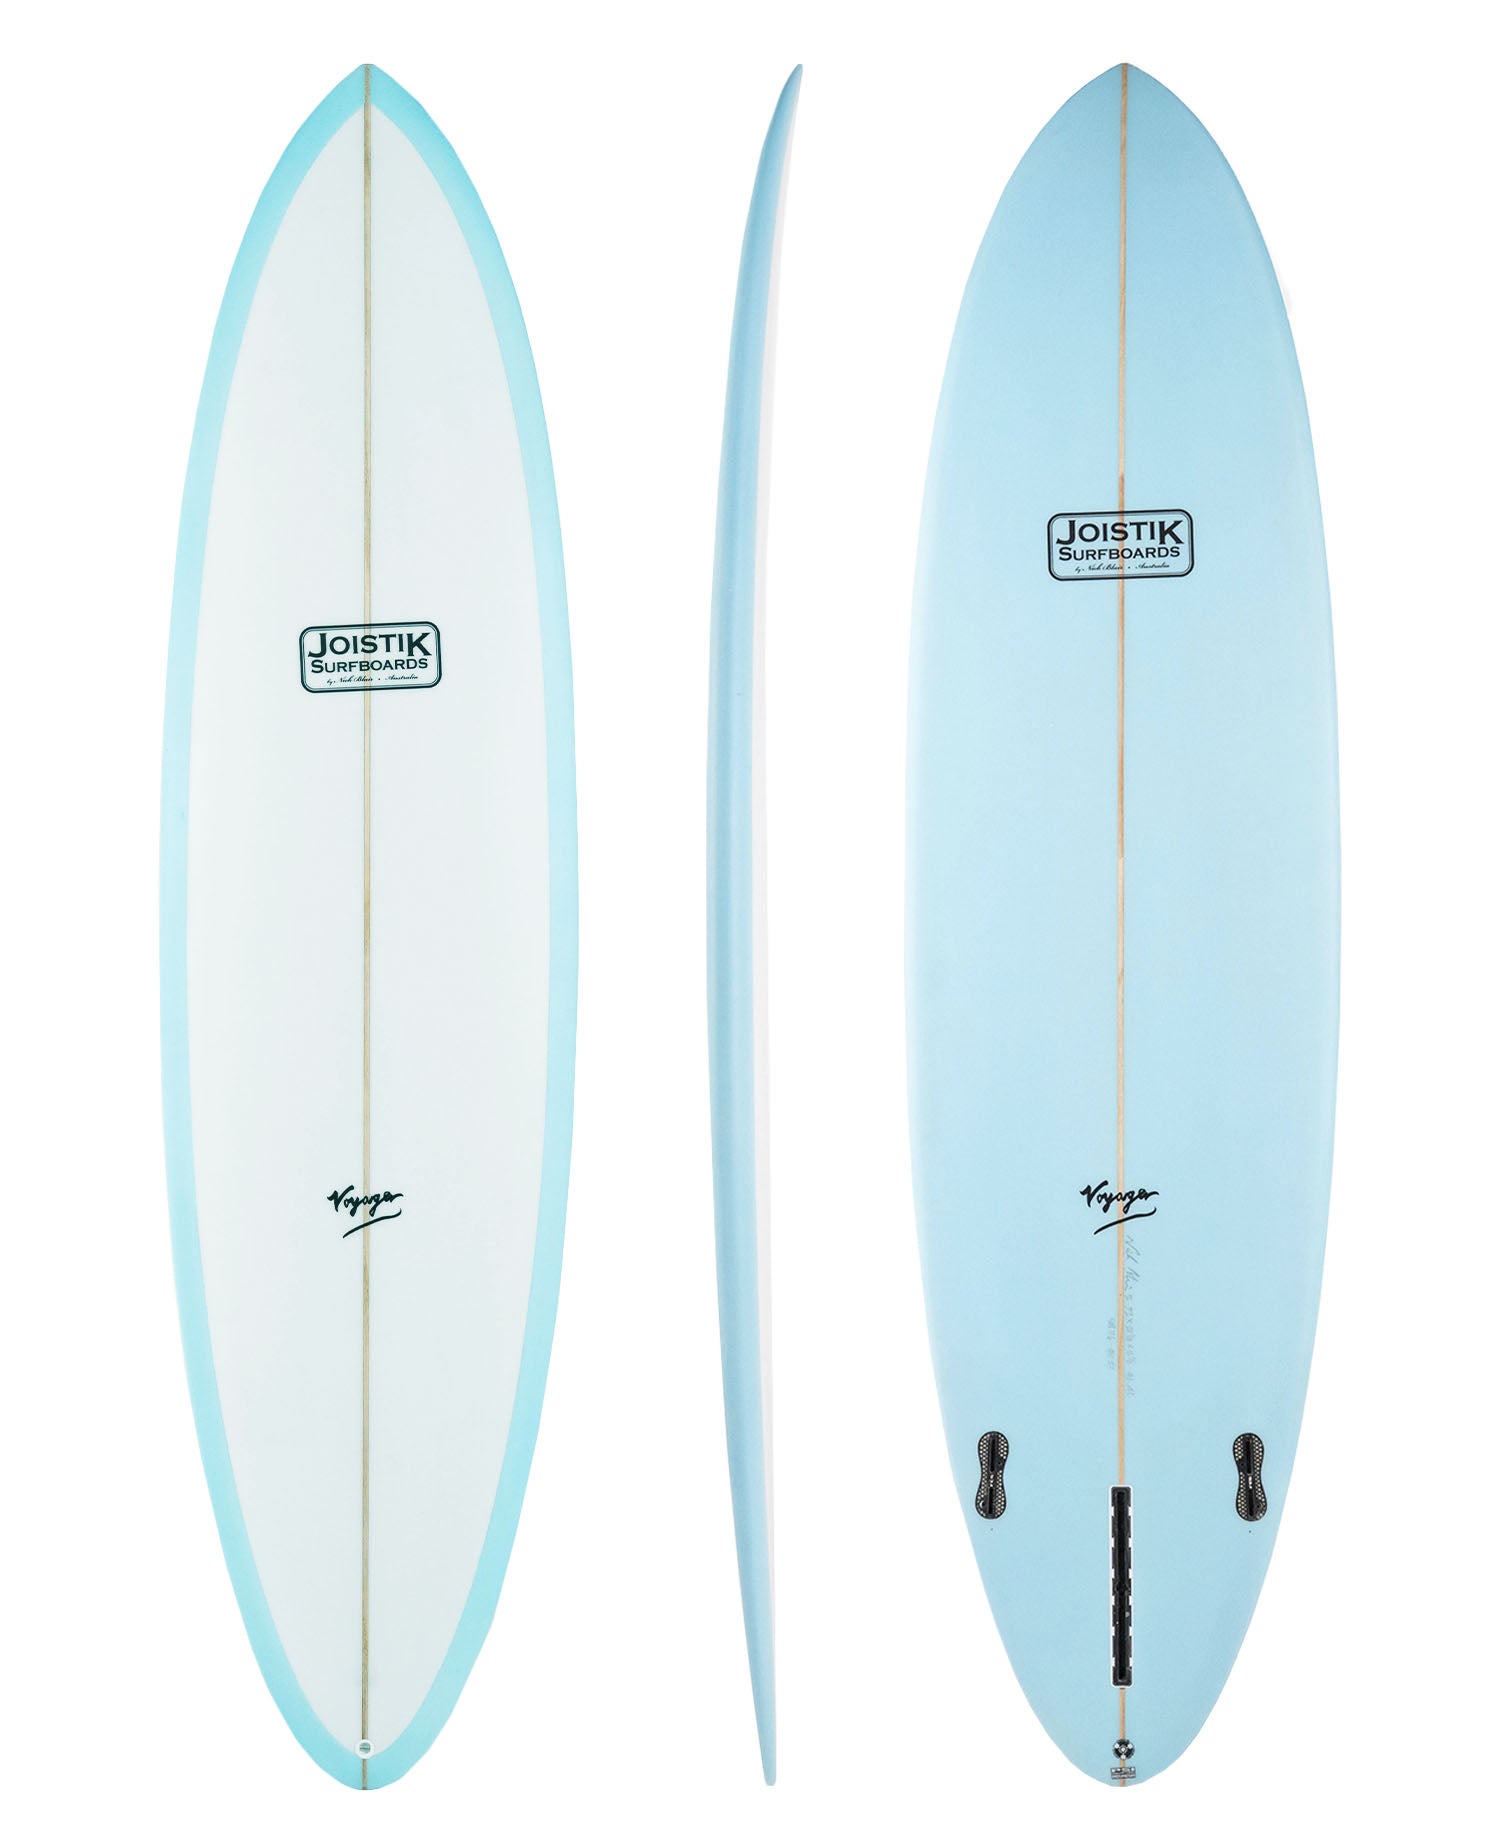 Joistik Surfboards Voyager by Nick Blair